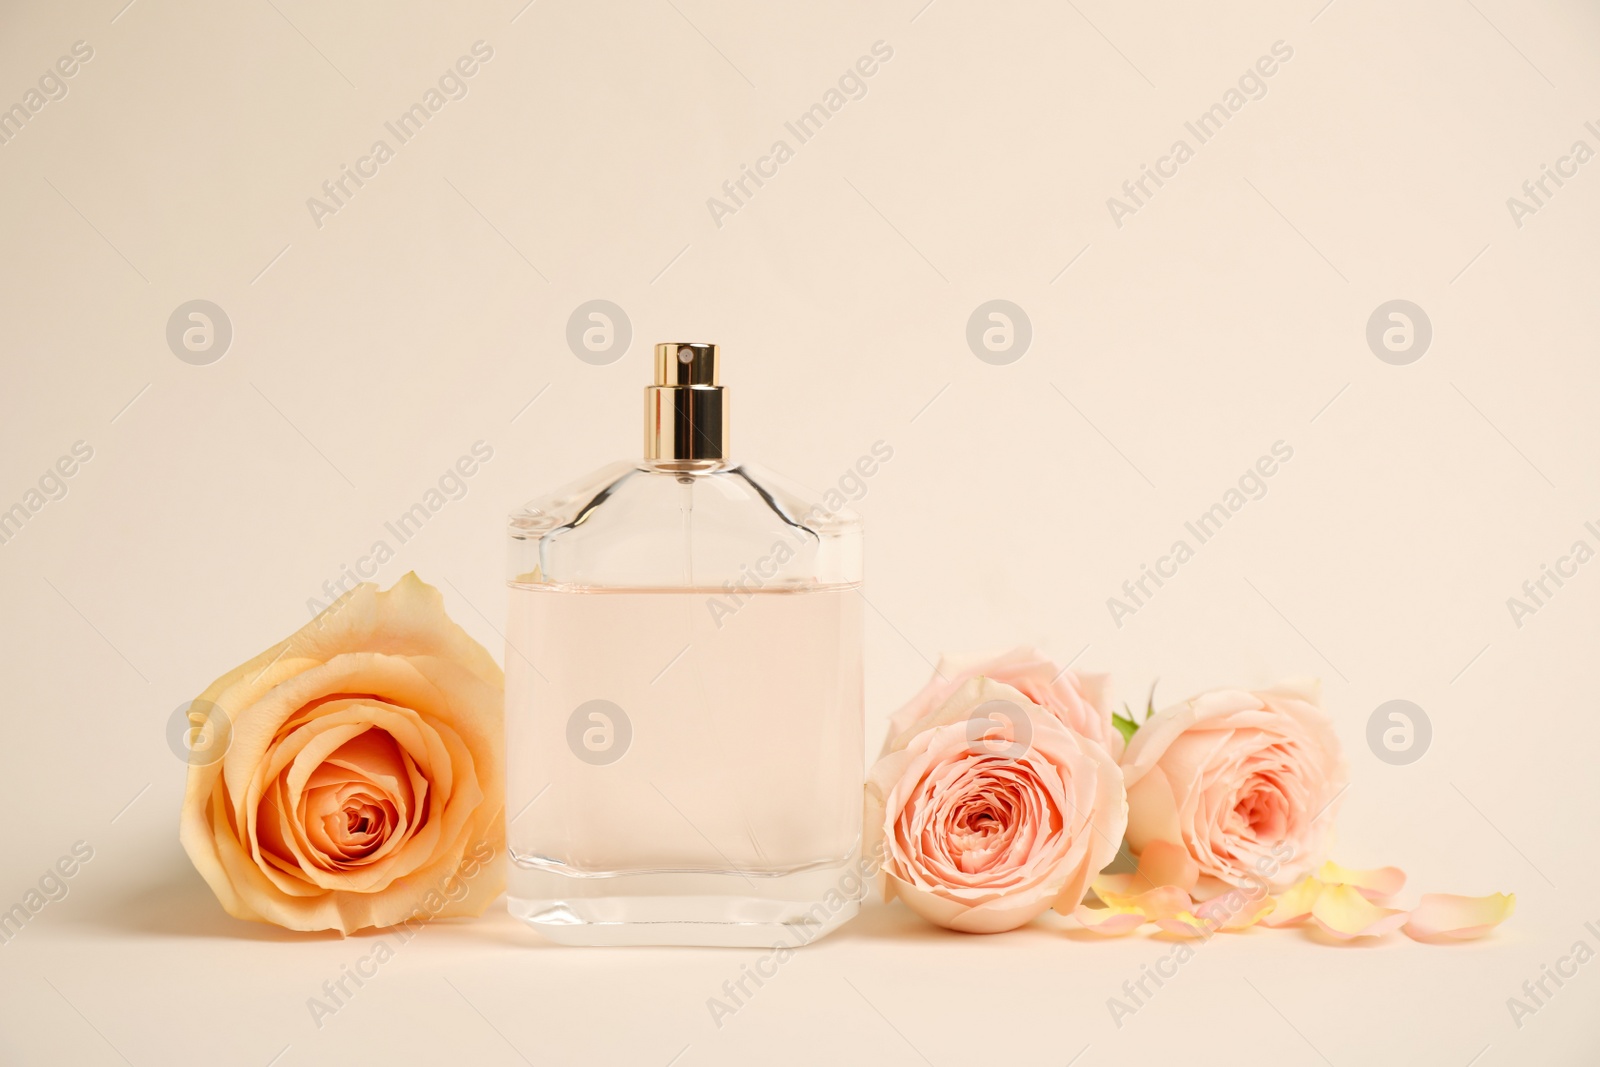 Photo of Bottle of perfume with roses on beige background